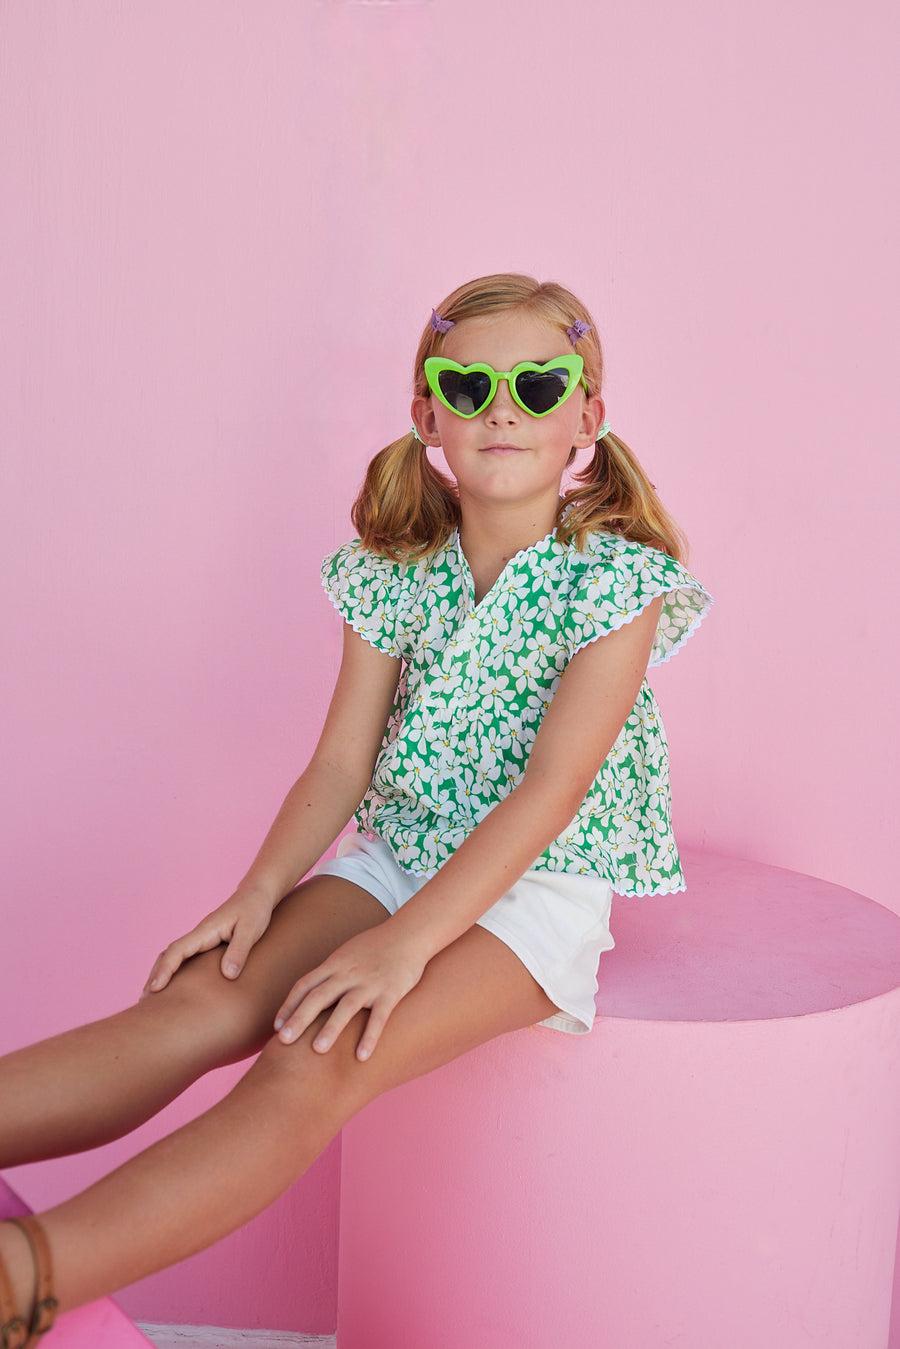 BISBY girl in our Positano Blouse in Piccadilly Lawn. A beautiful green base with white and yellow floral pattern. Shirt has scalloped edges on the sleeves and bottom of shirt and has a v-neck making it easy to get in and out of